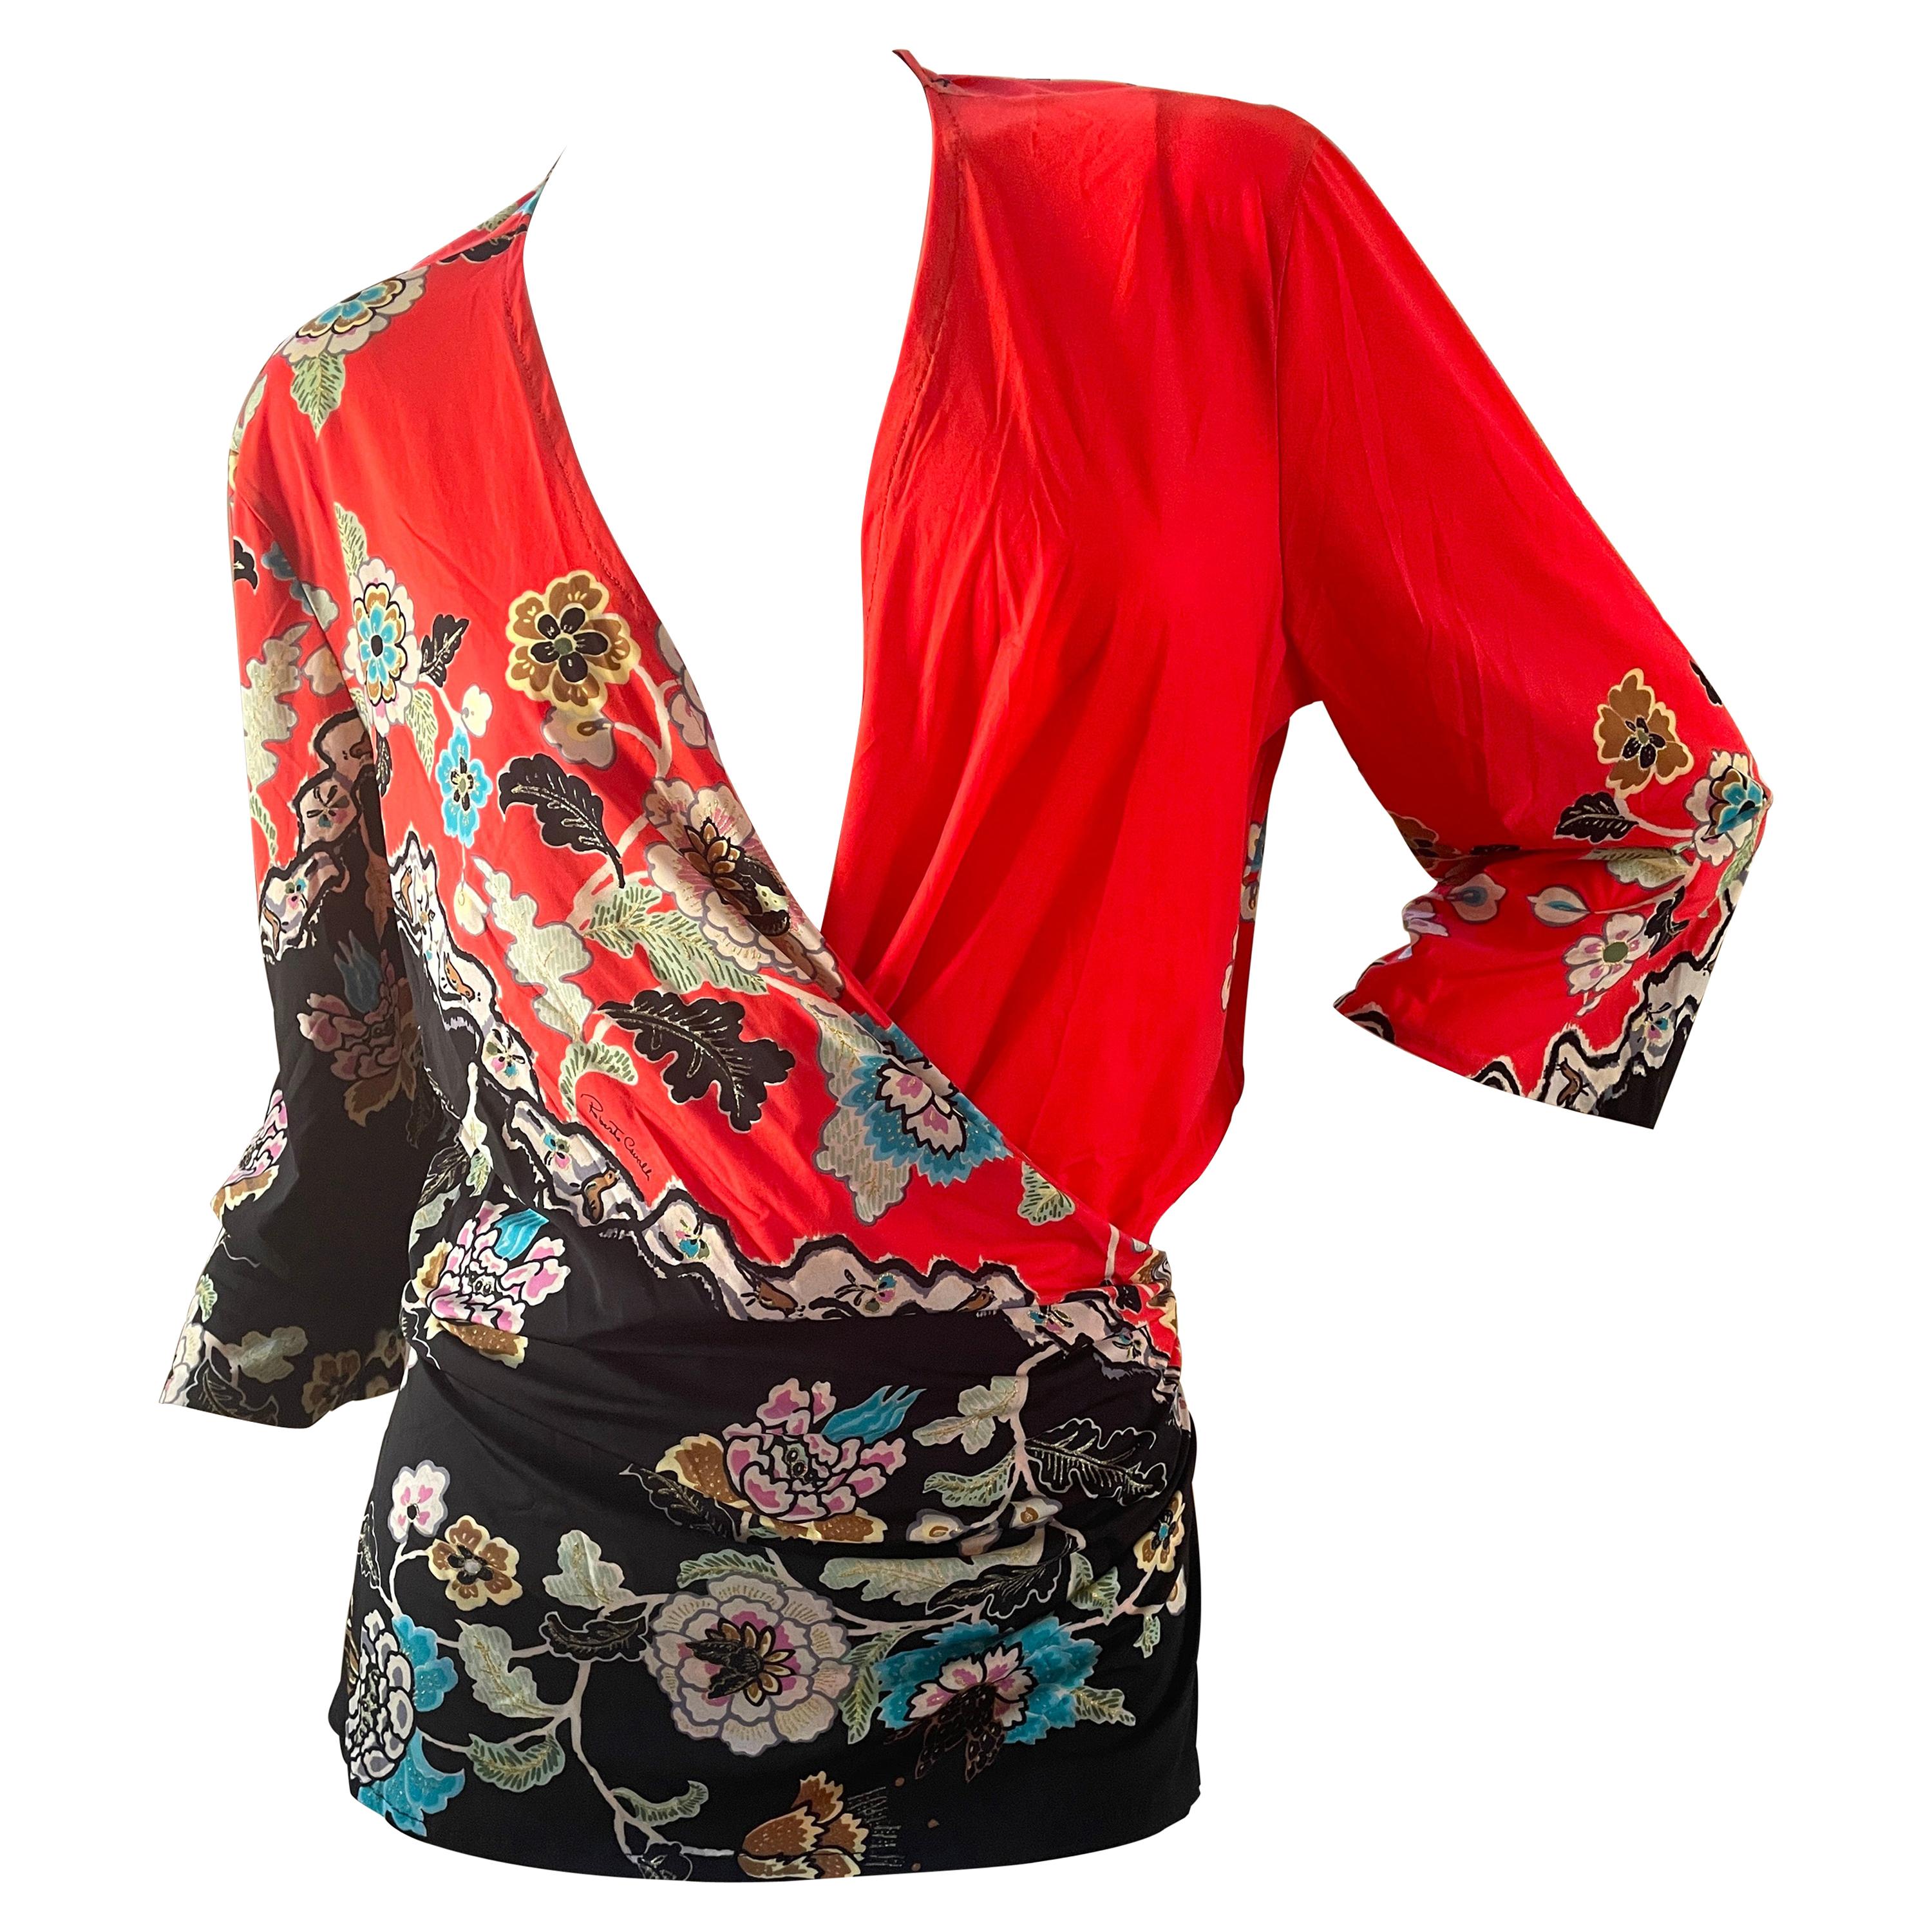 Roberto Cavalli Spring 2003 Chinoiserie Top For Sale